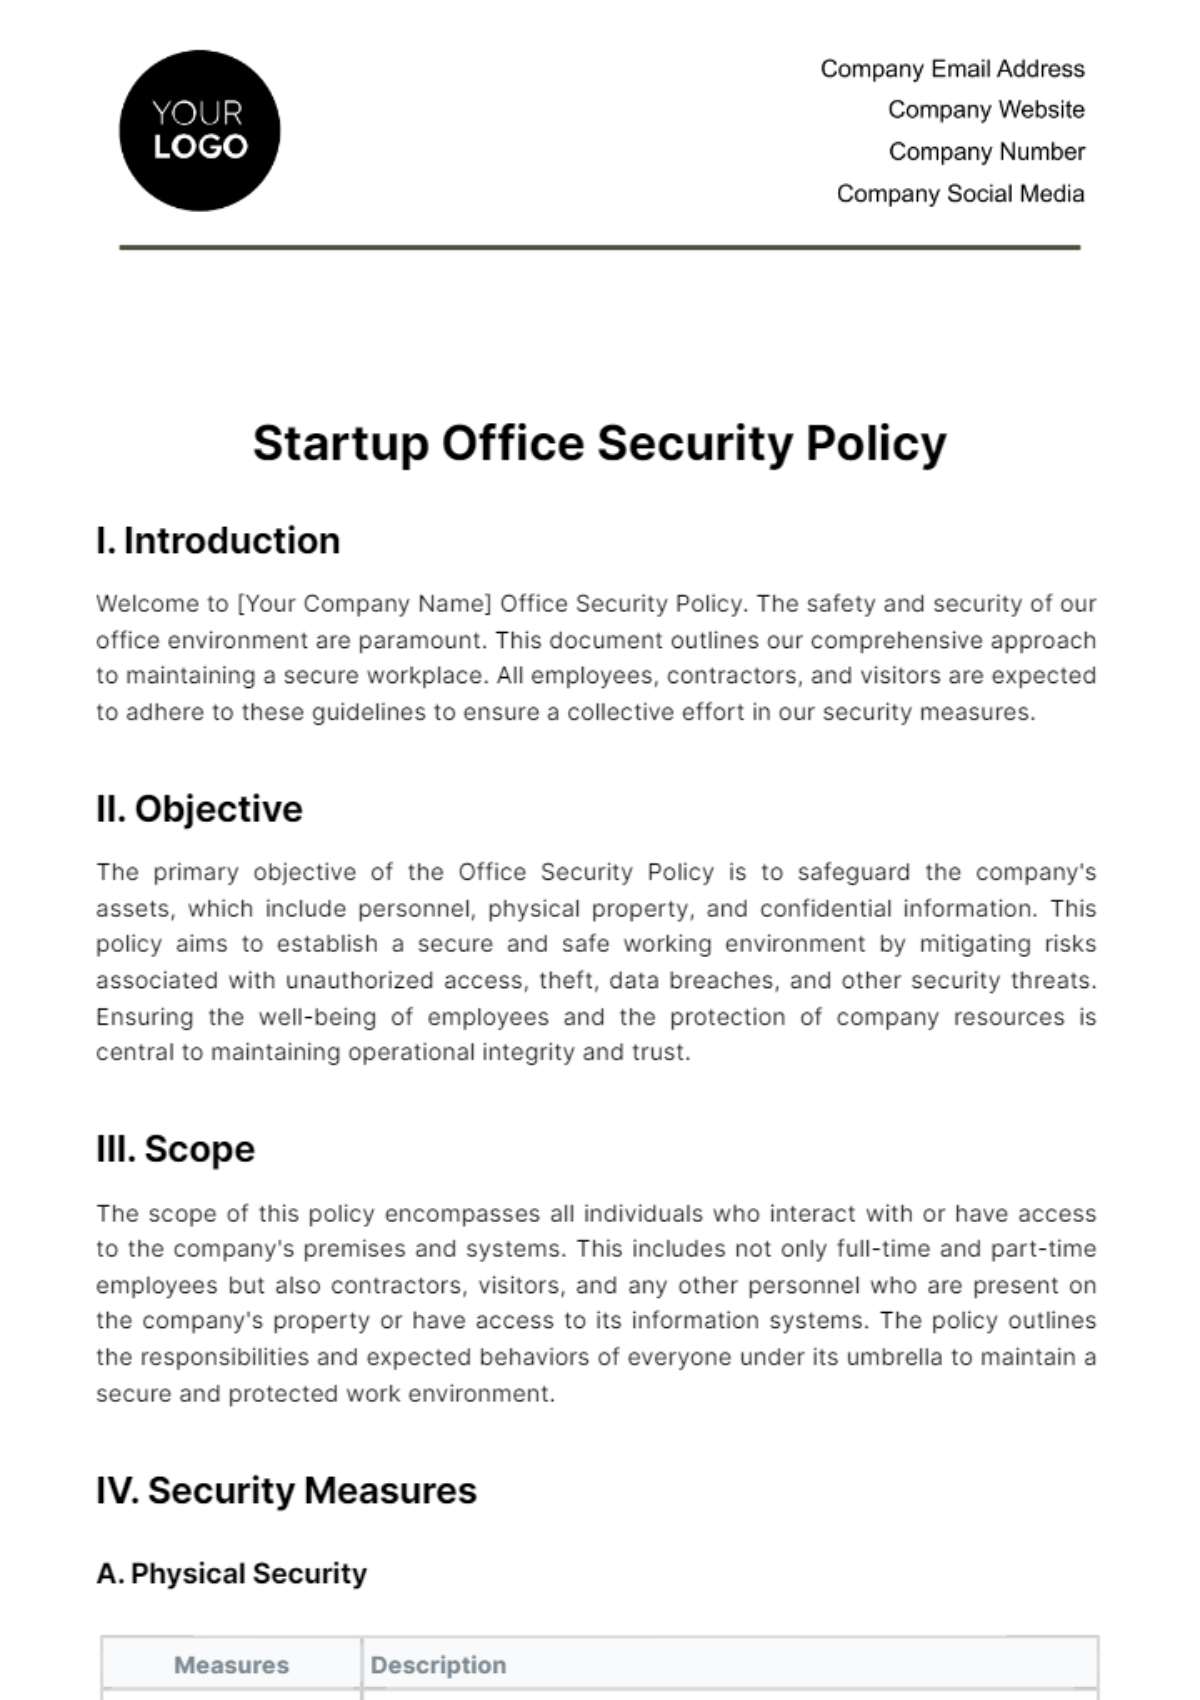 Startup Office Security Policy Template